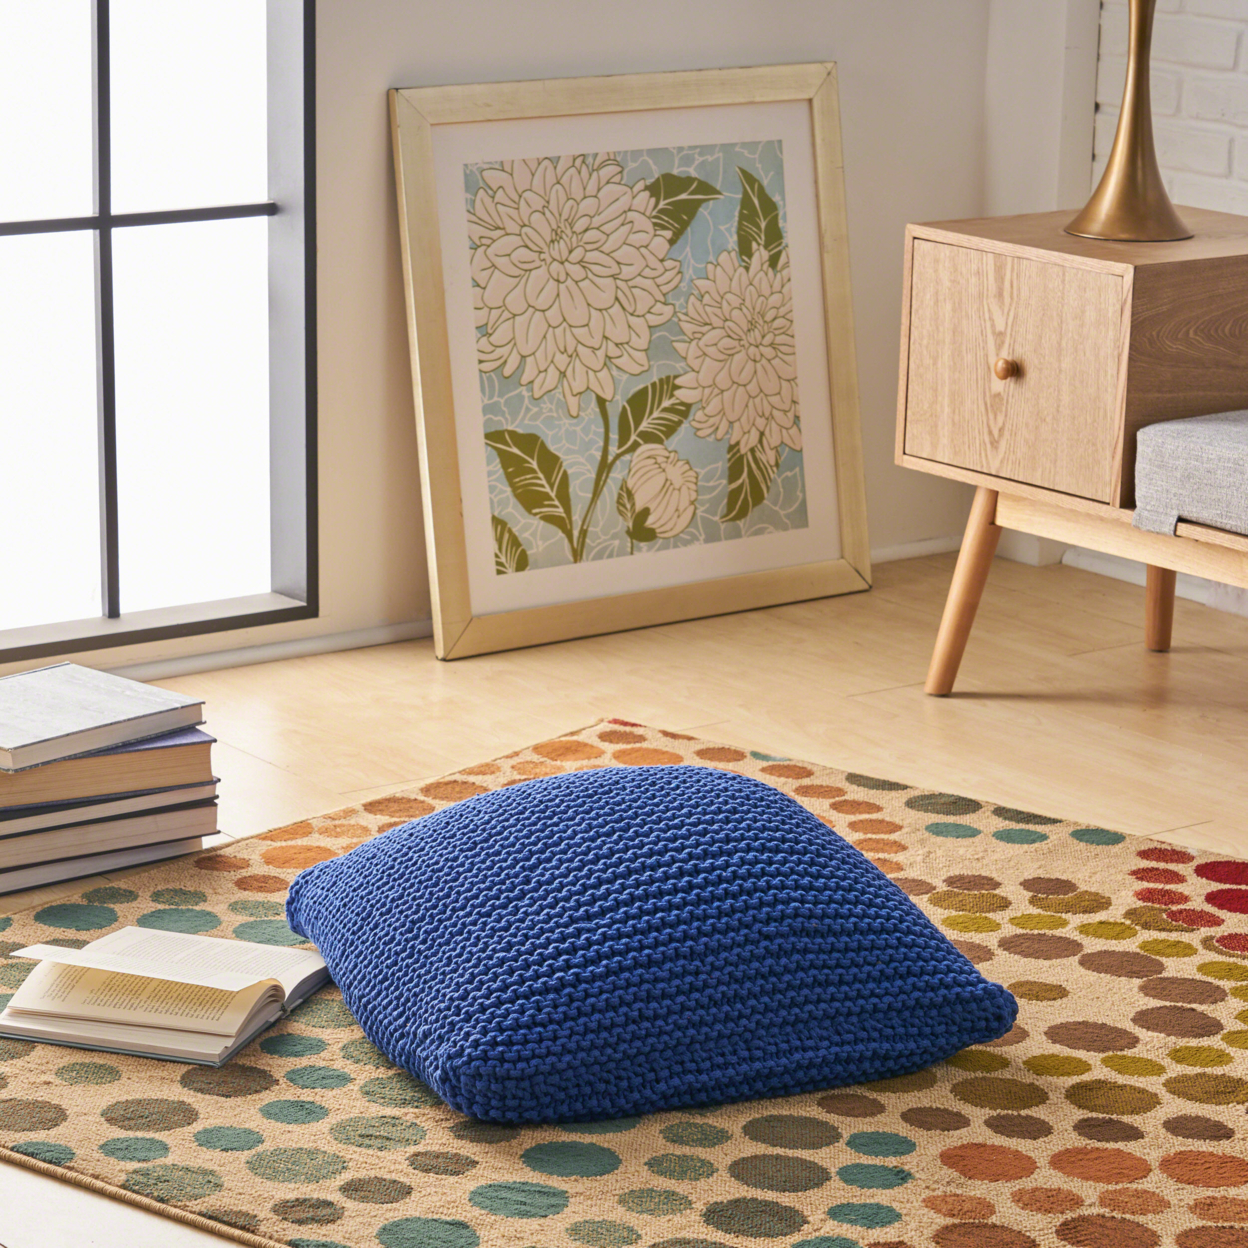 Cary Knitted Cotton Floor Cushion - Navy